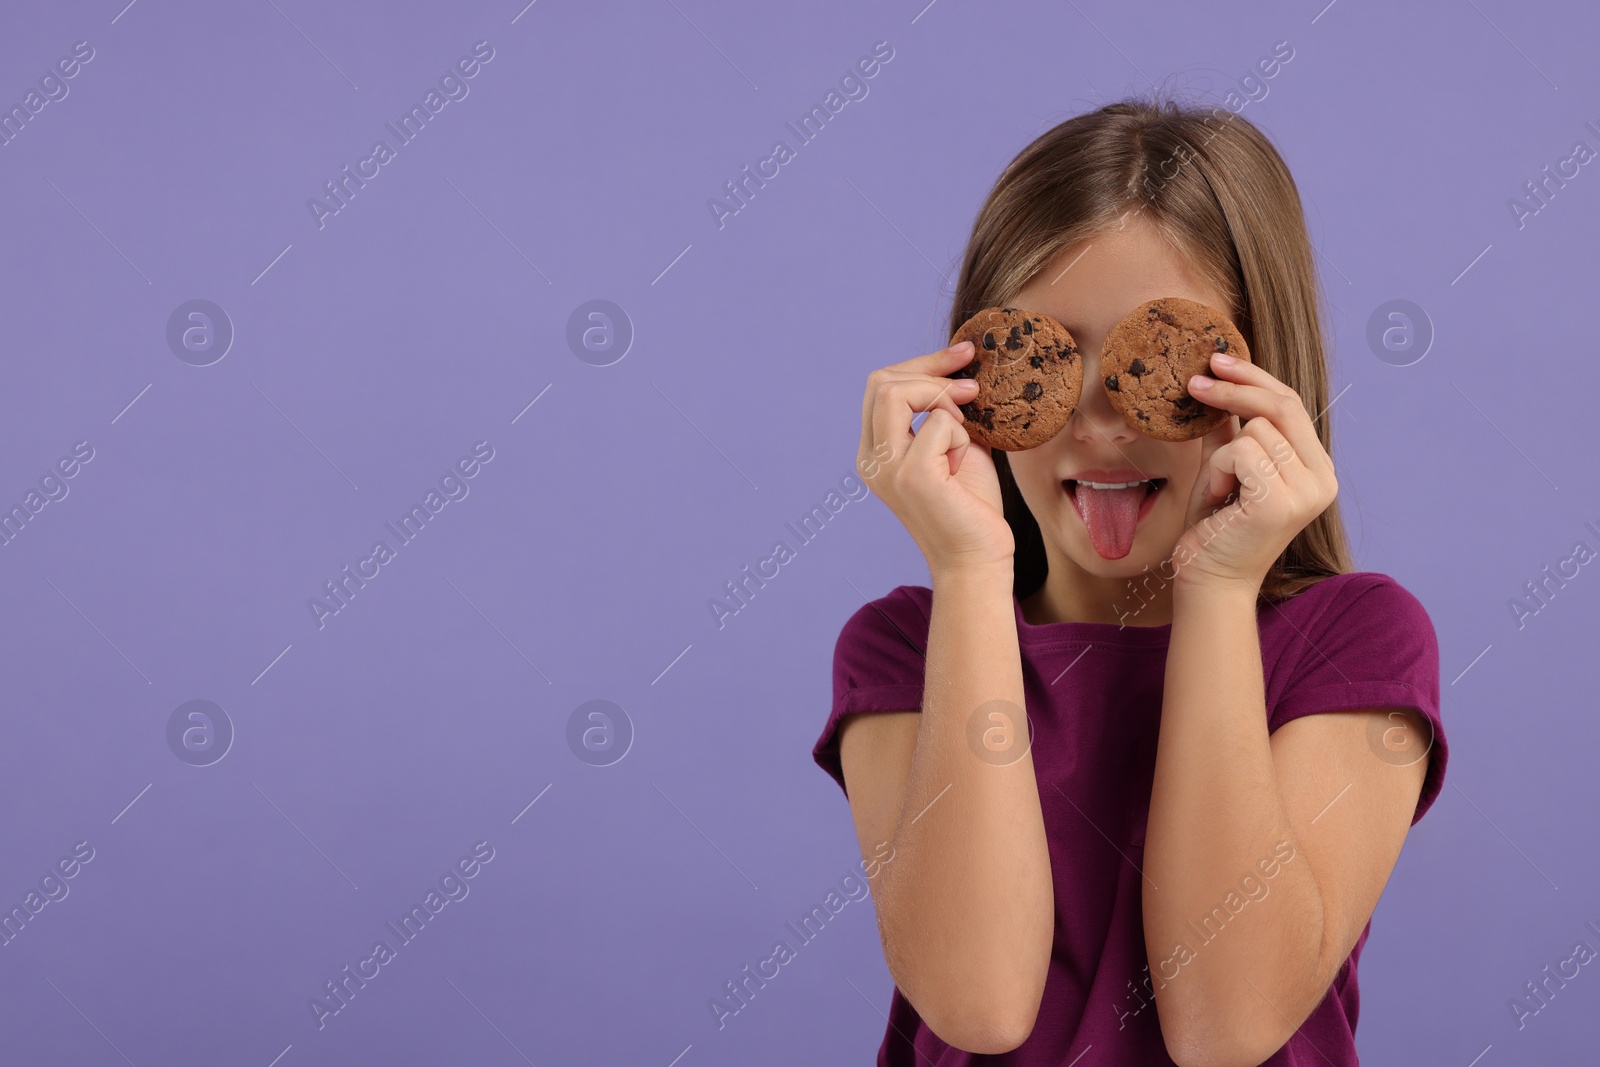 Photo of Girl covering eyes with chocolate chip cookies and showing tongue on purple background. Space for text